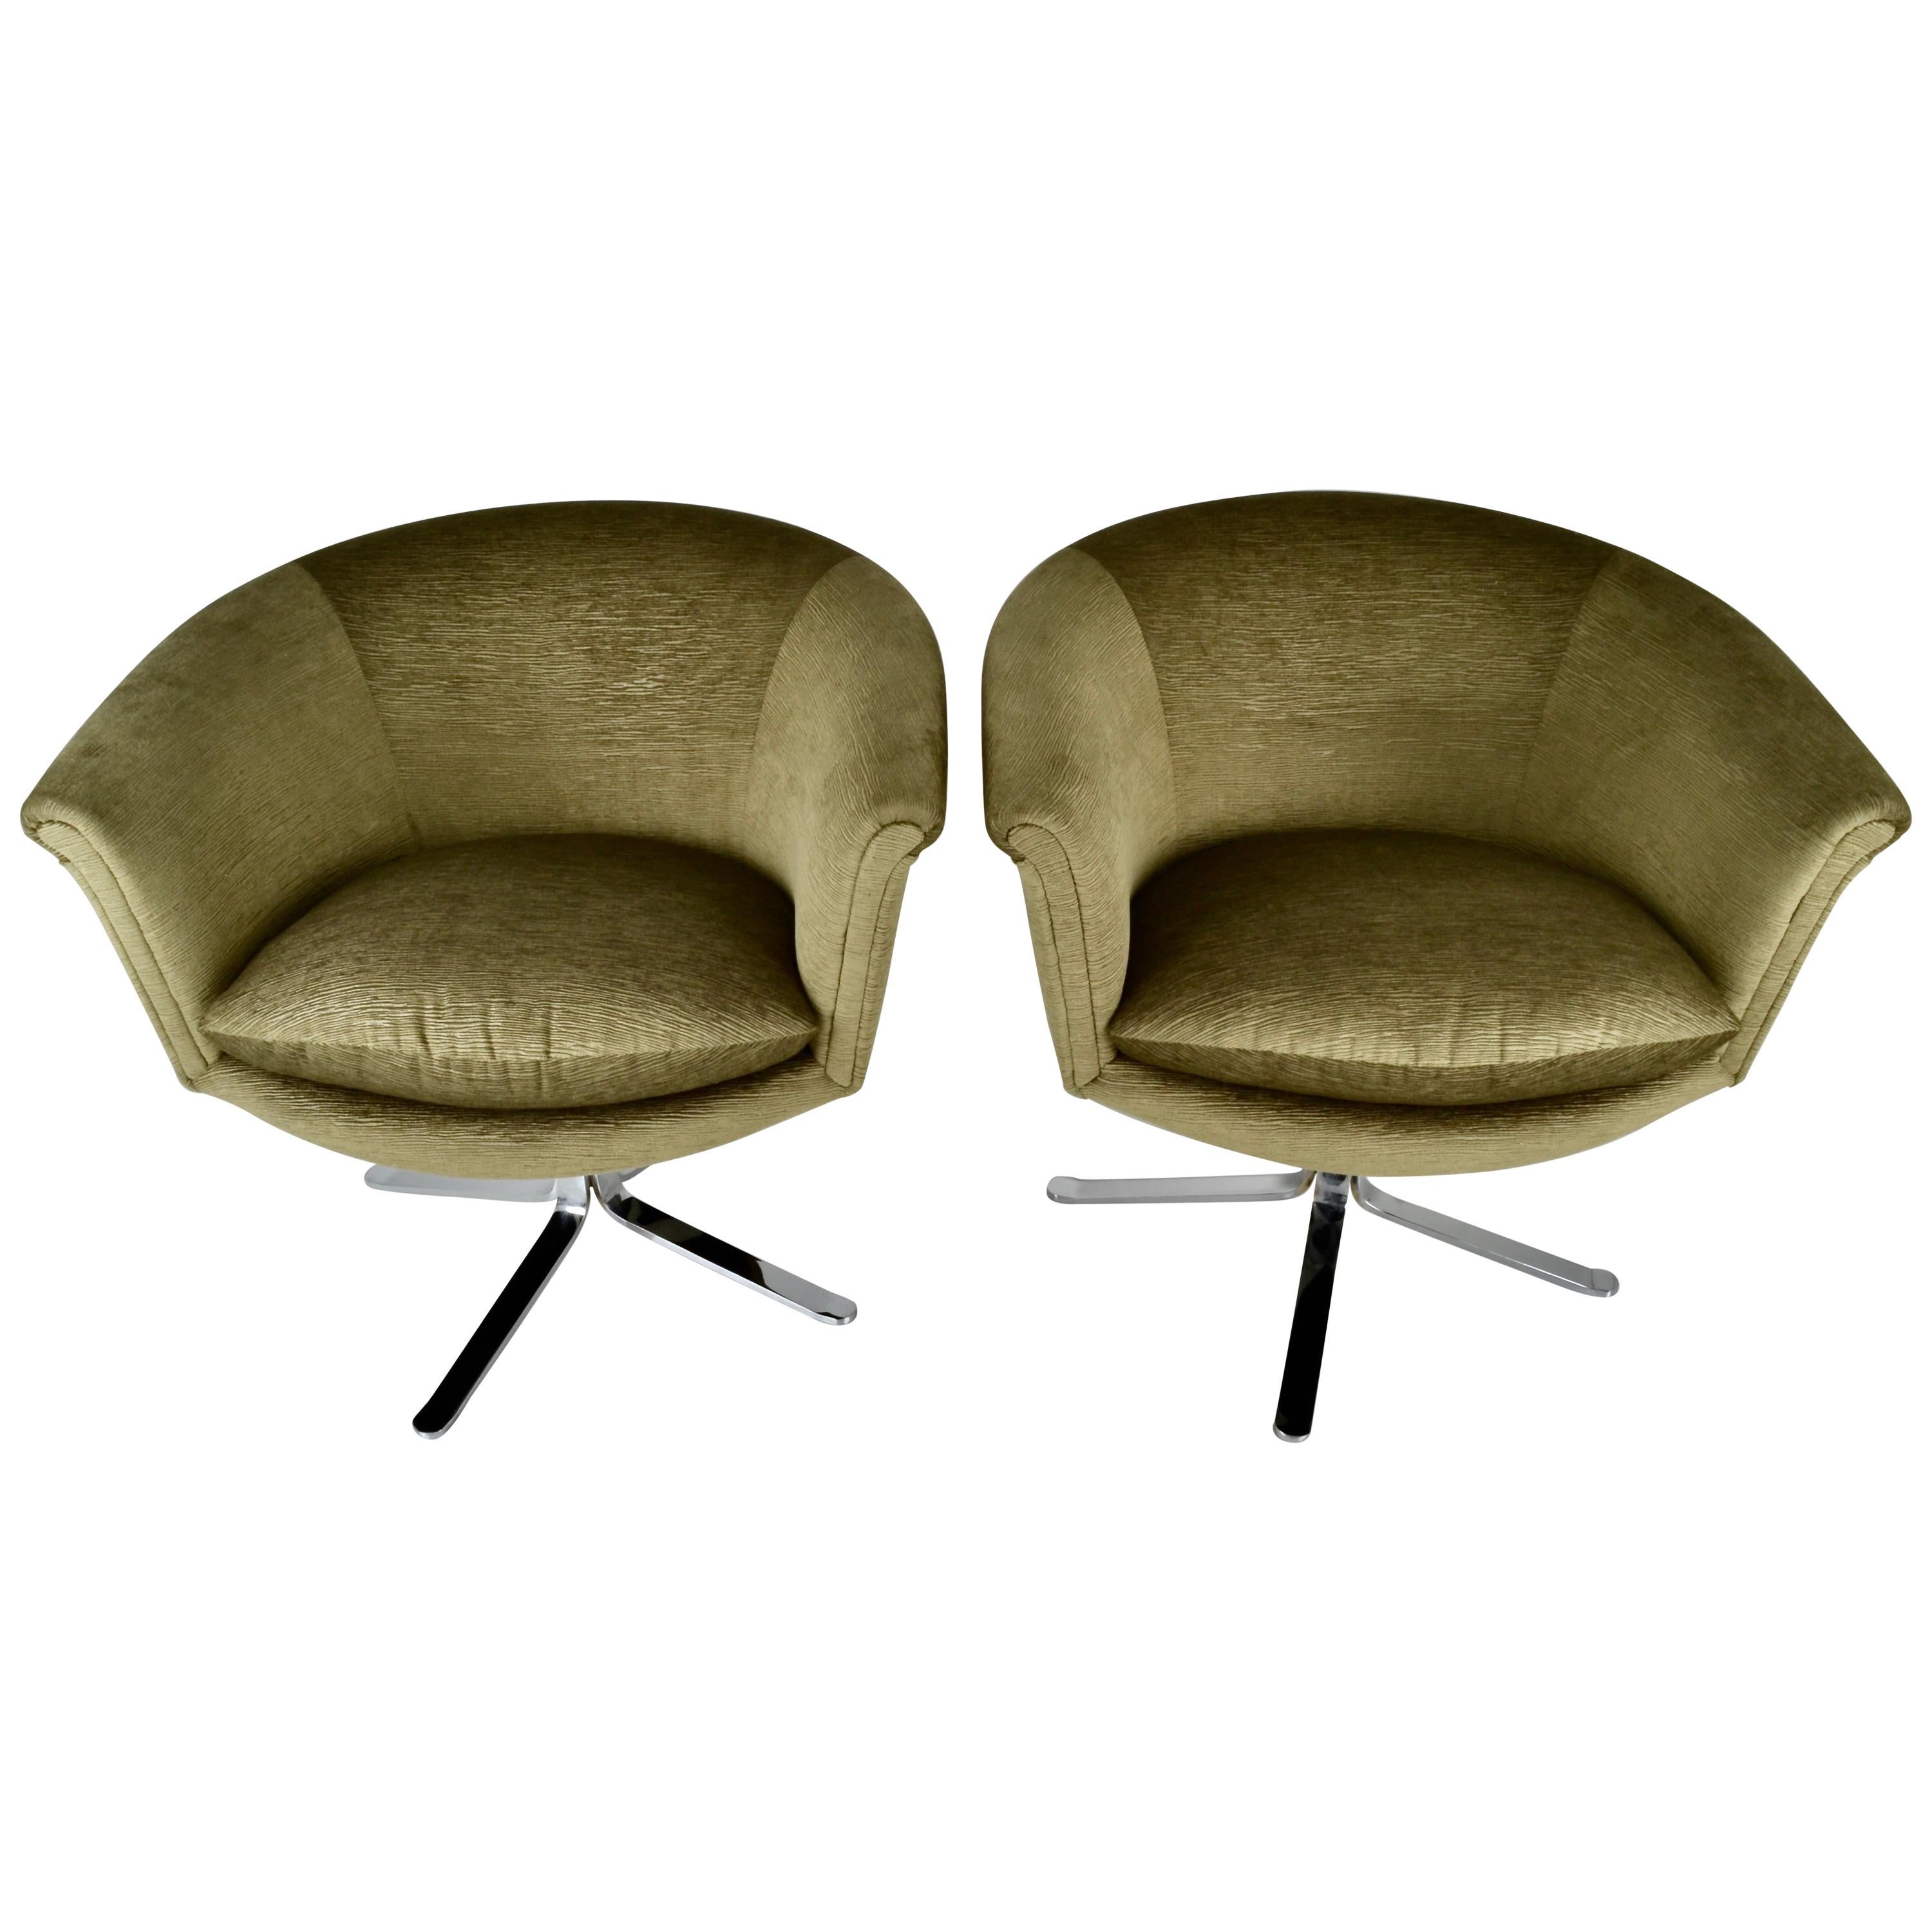 Pair of Swivel Chairs by Nicos Zographos